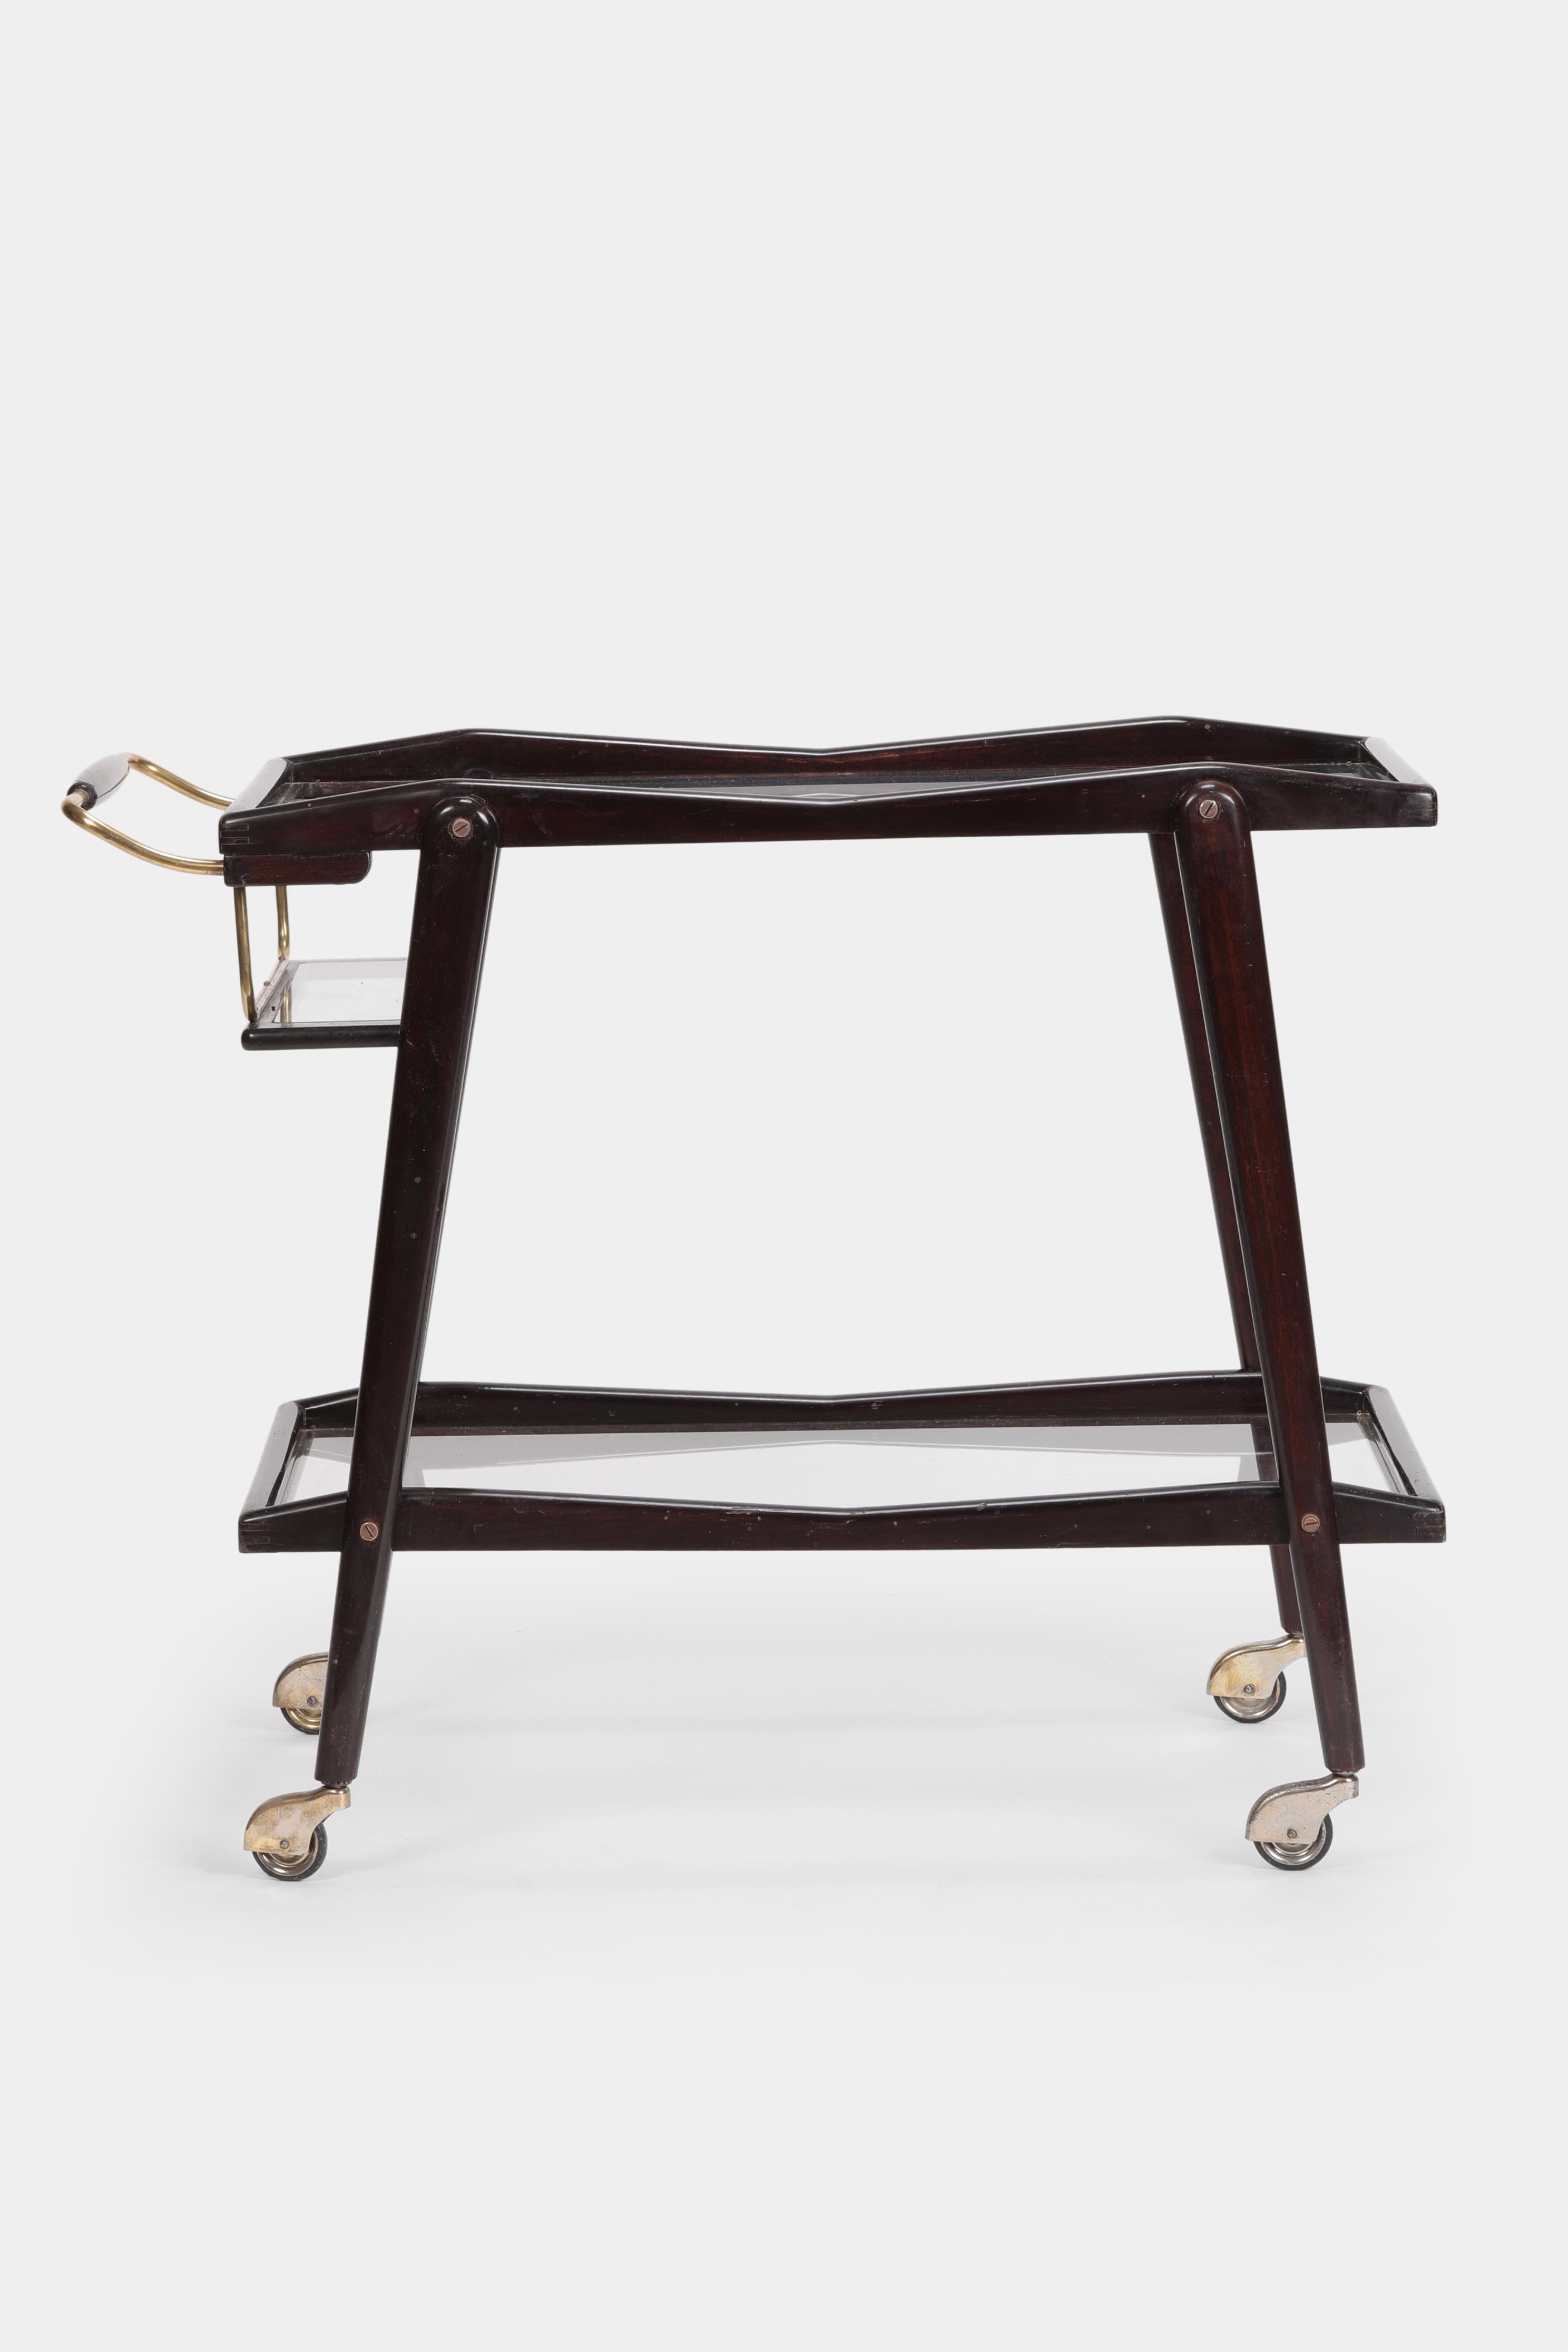 Italian Cesare Lacca Serving Trolley, 1950s For Sale